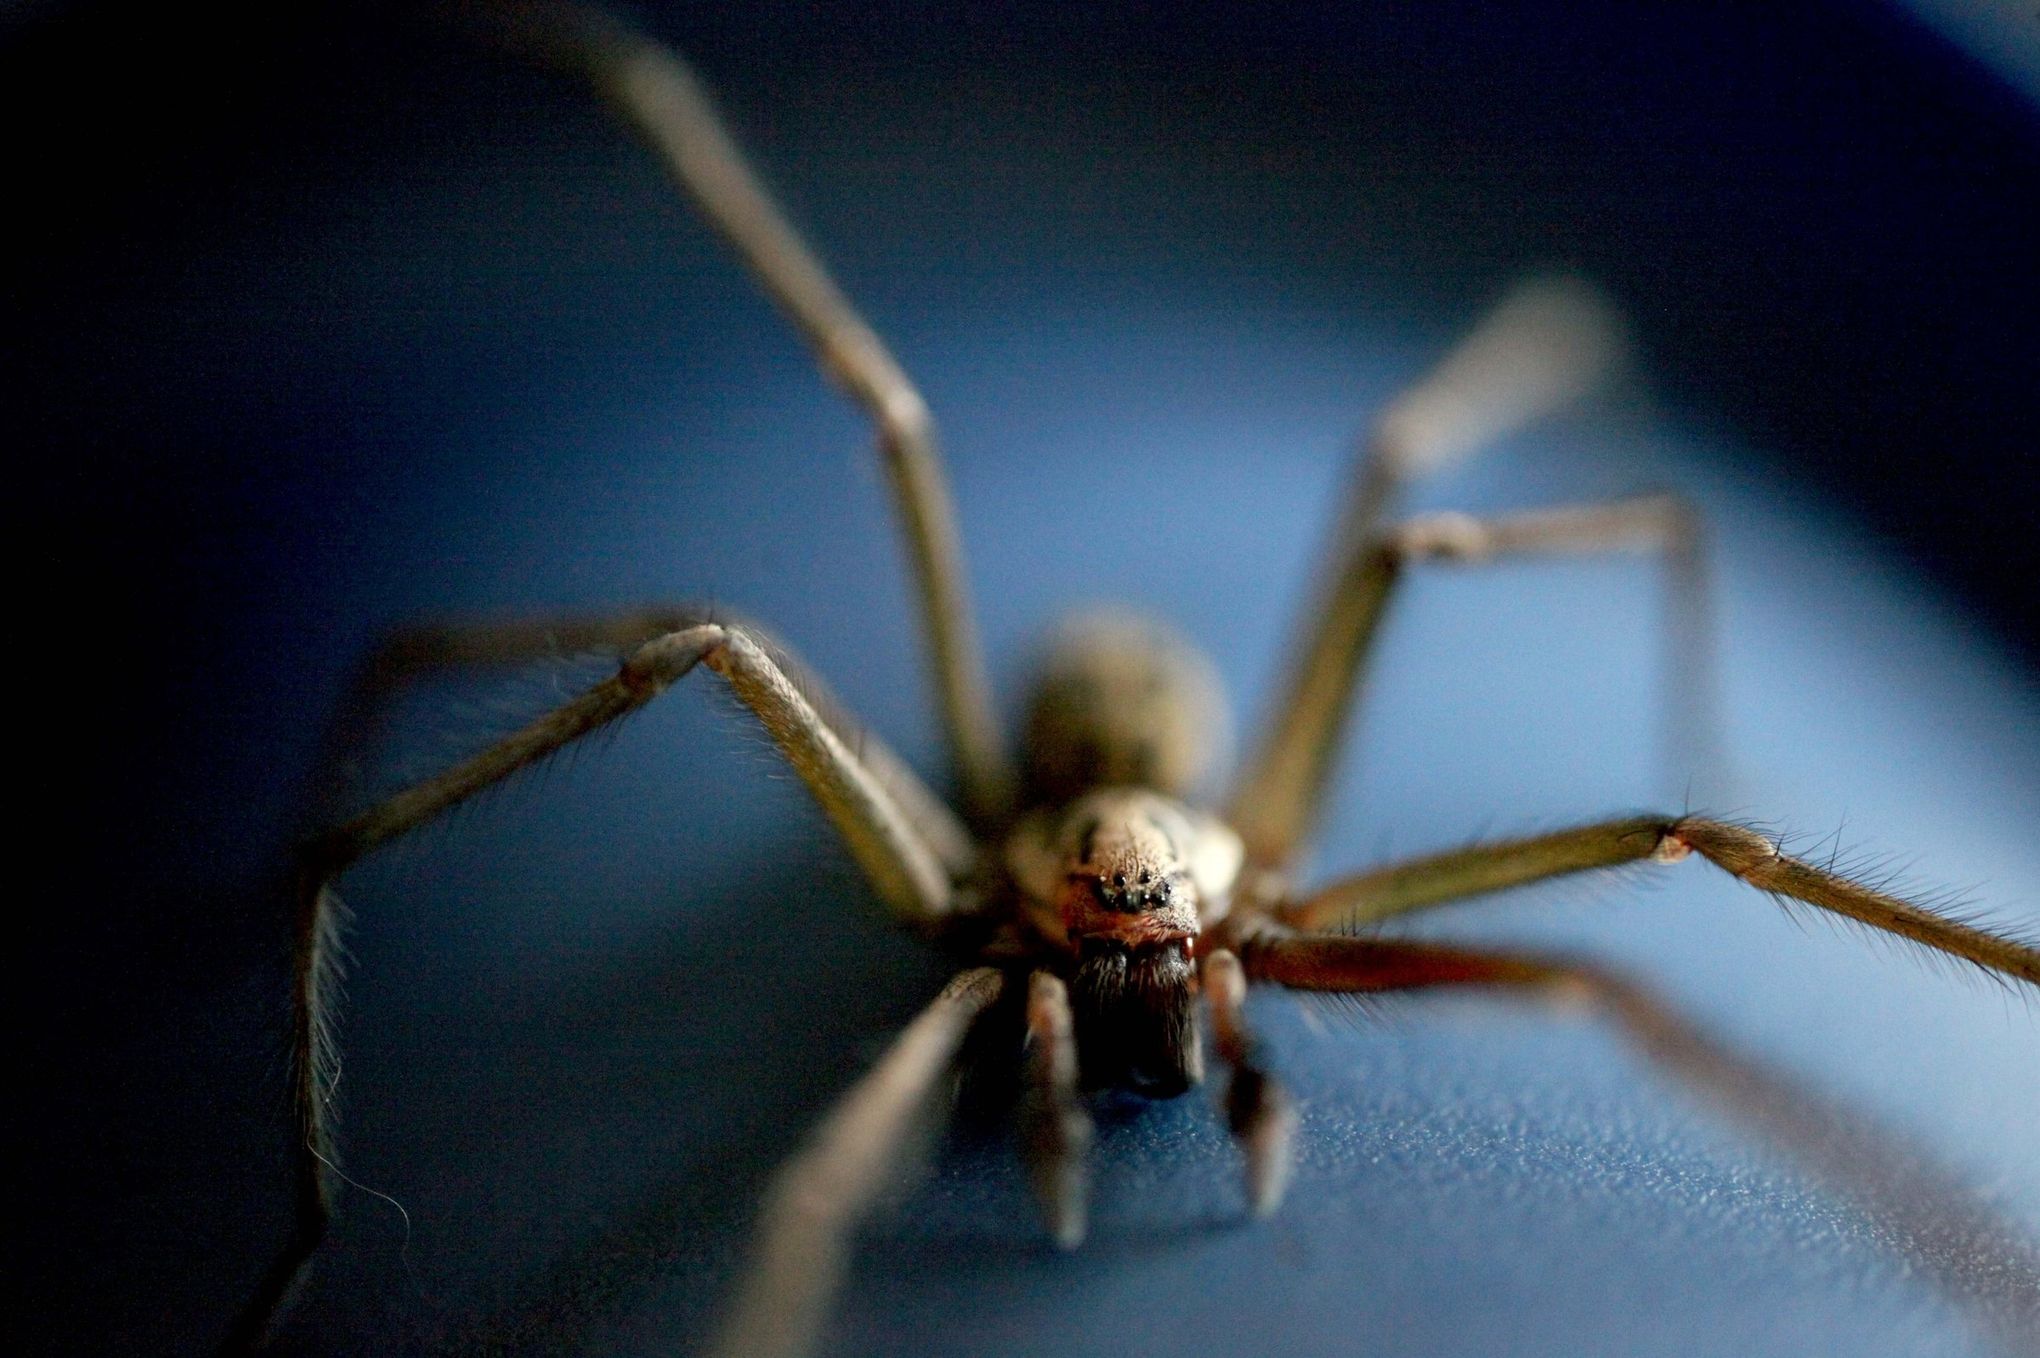 Spiders can detect sound through their webs - The Washington Post